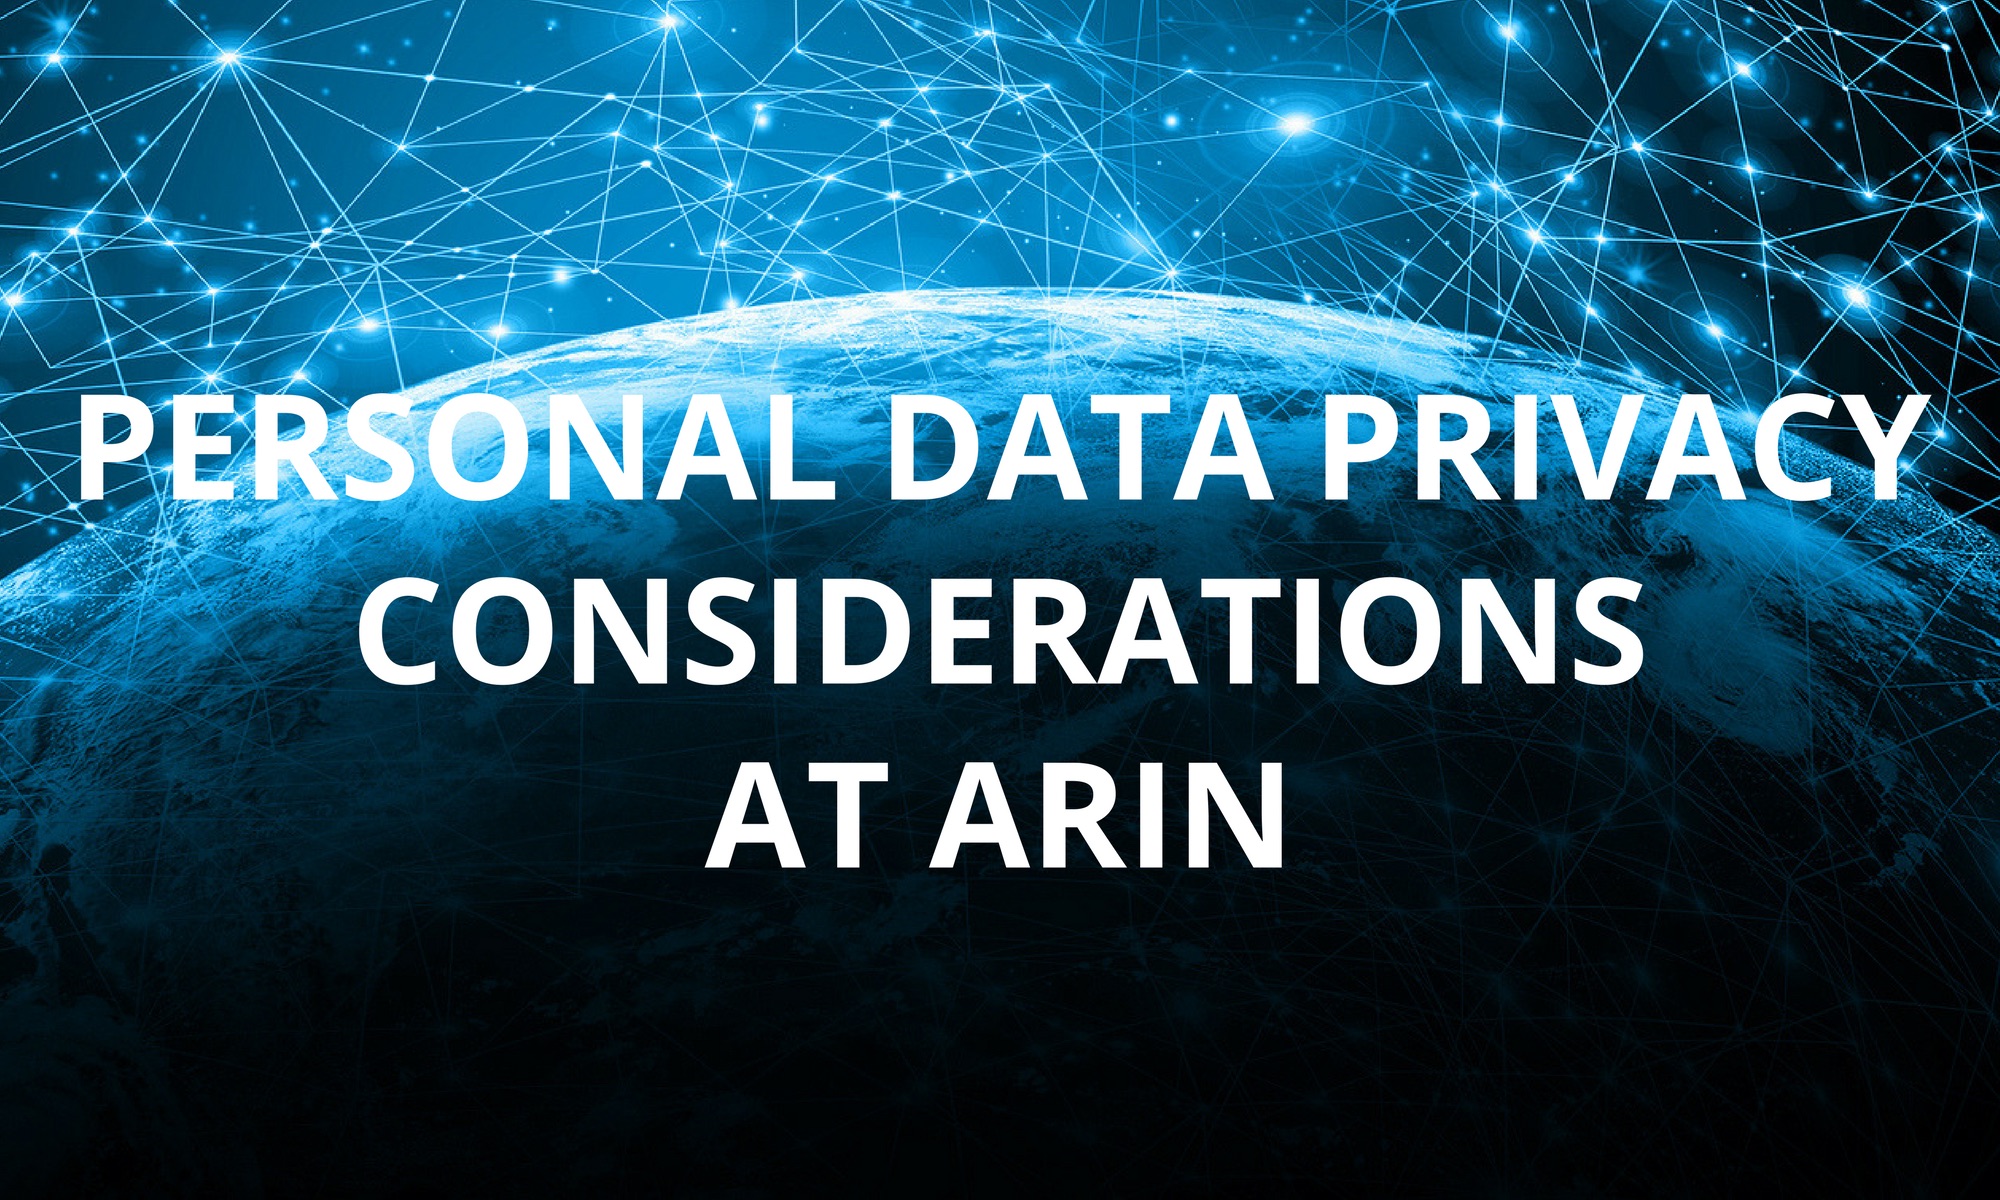 Personal Data Privacy Considerations at ARIN